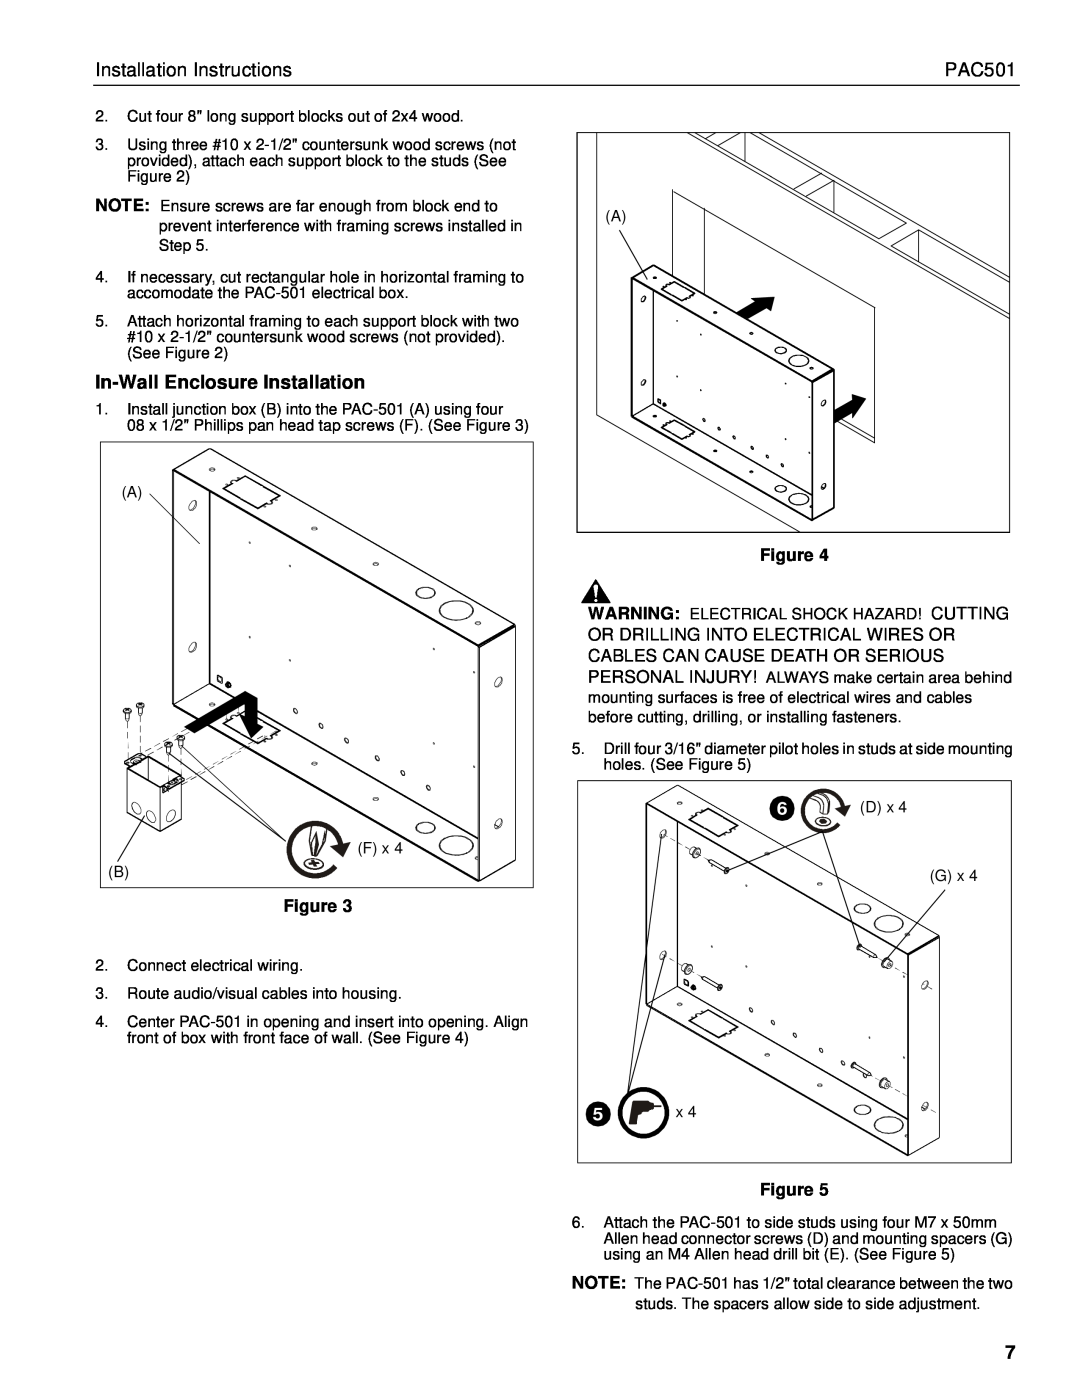 Chief Manufacturing PAC501 installation instructions In-WallEnclosure Installation, Installation Instructions 